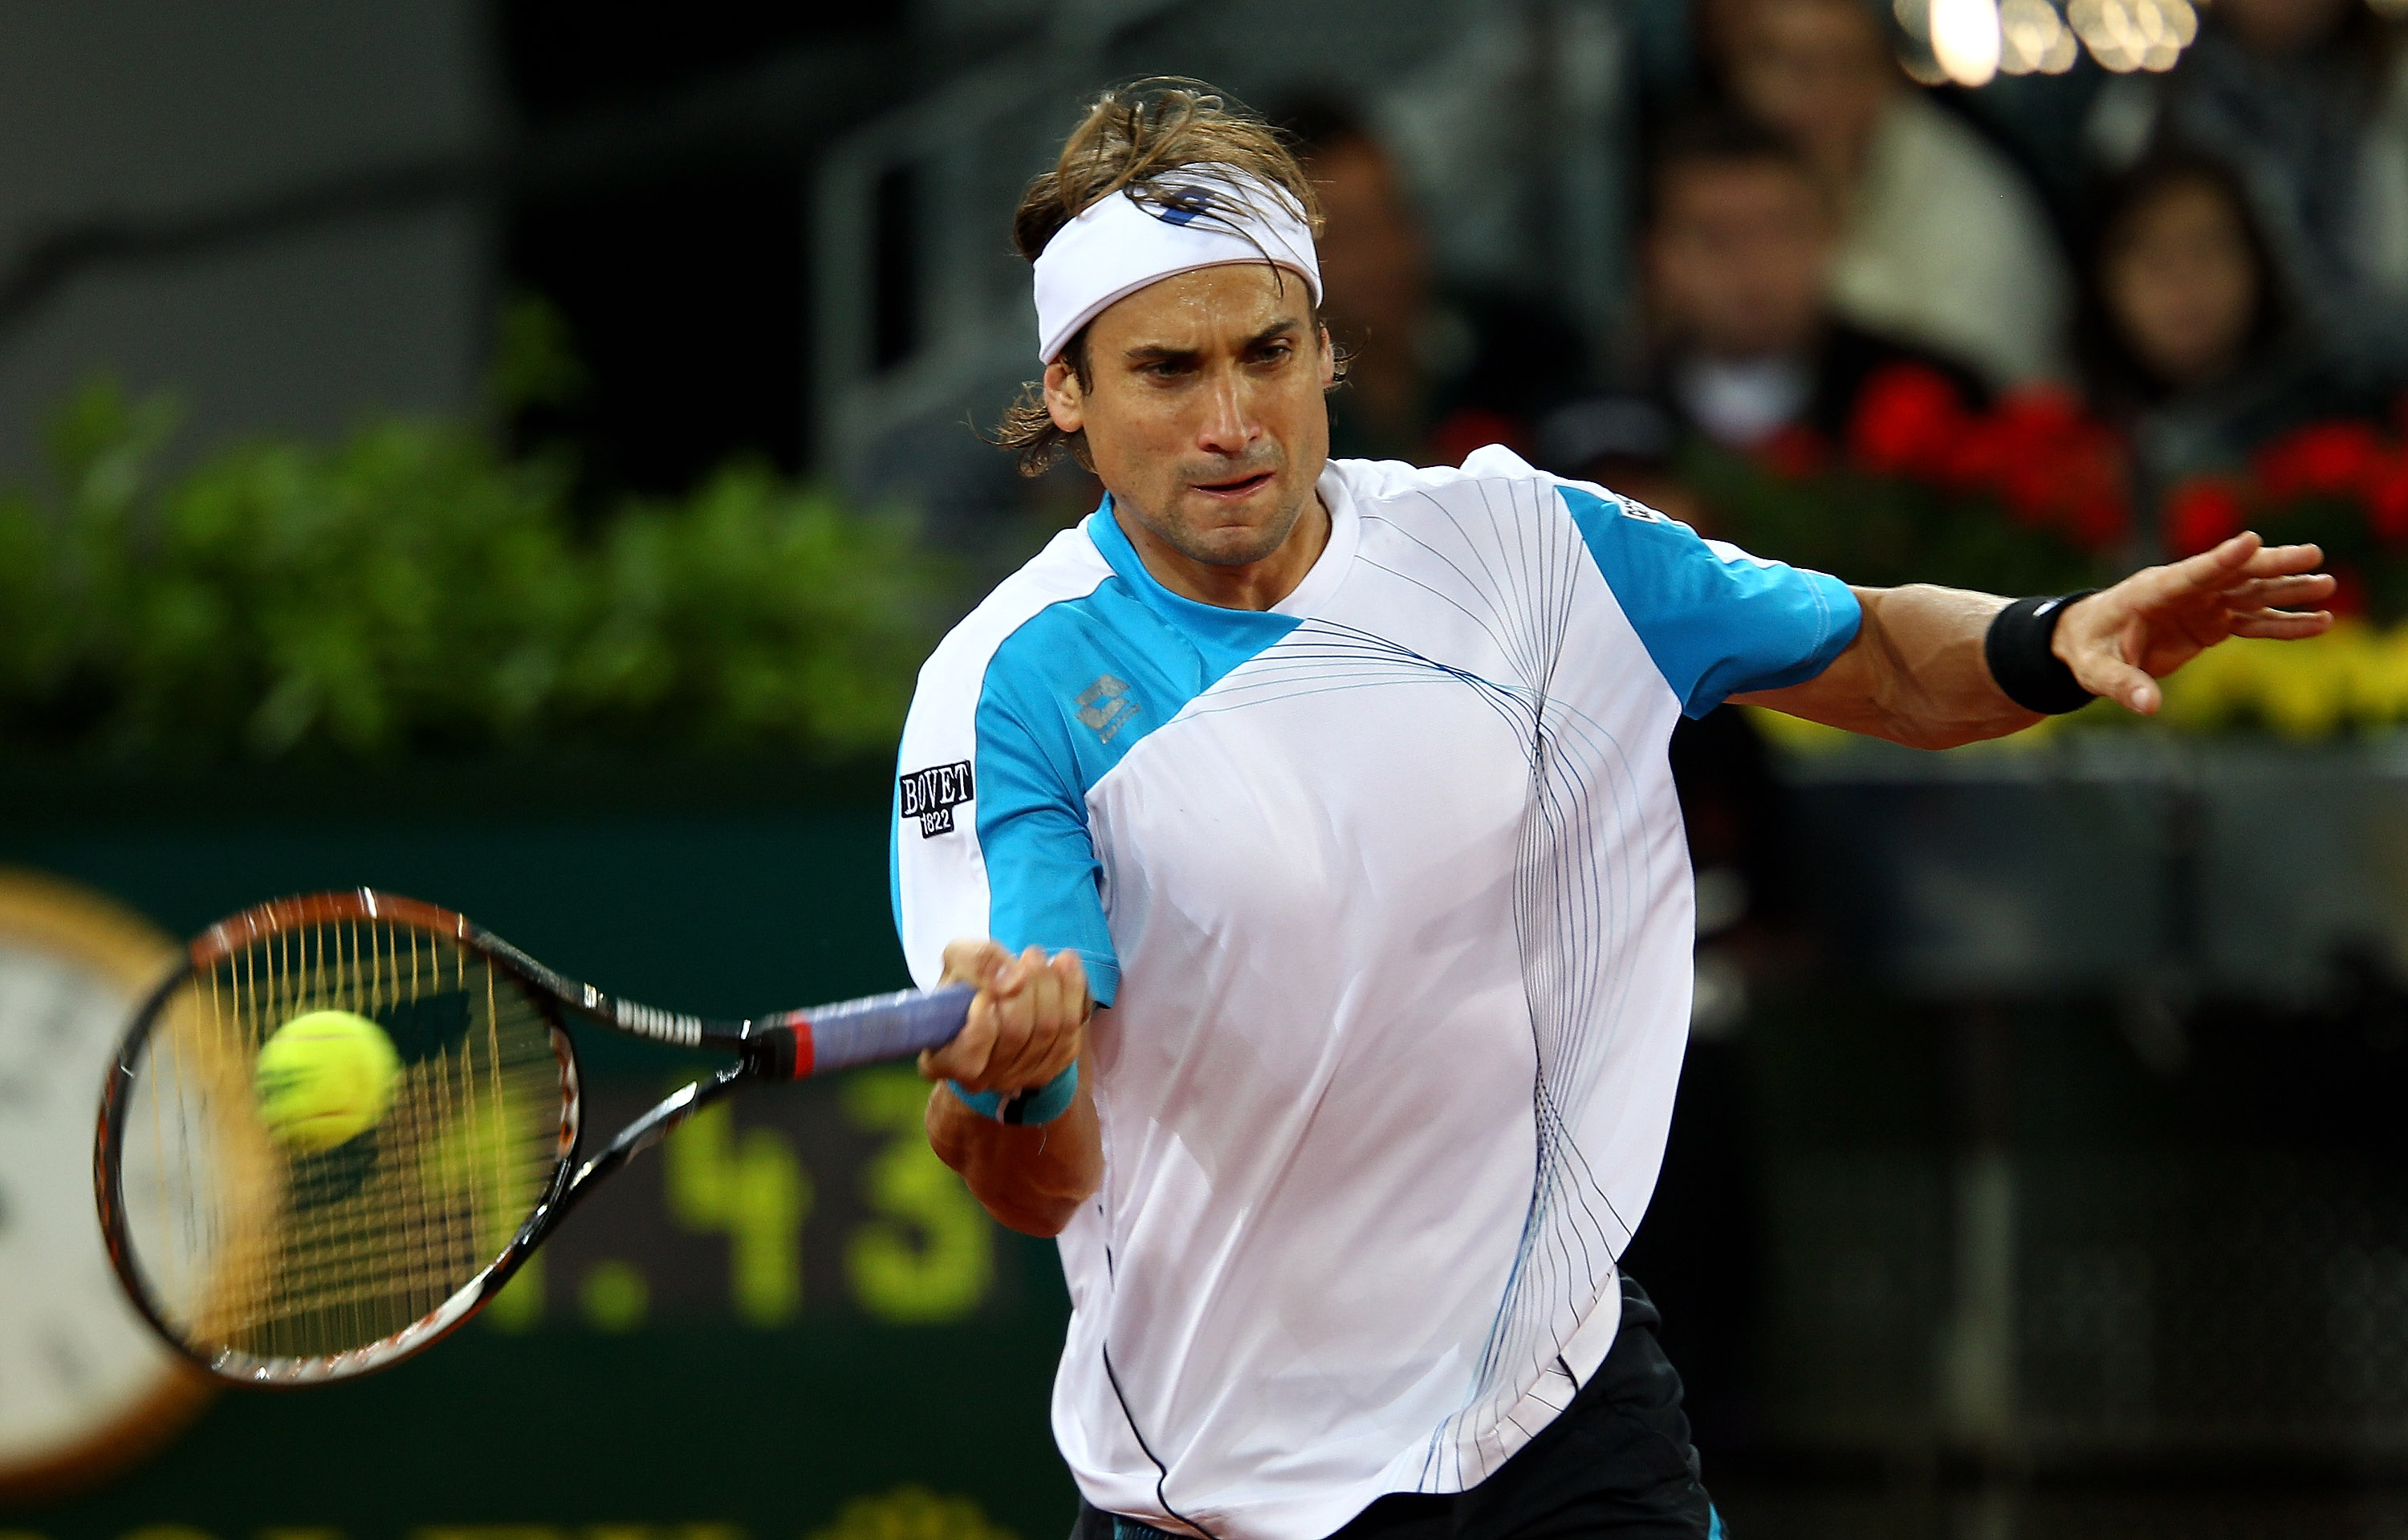 MADRID, SPAIN - MAY 15:  David Ferrer of Spain plays a forehand against Roger Federer of Switzerland in their semi final match during the Mutua Madrilena Madrid Open tennis tournament at the Caja Magica on May 15, 2010 in Madrid, Spain.  (Photo by Clive B